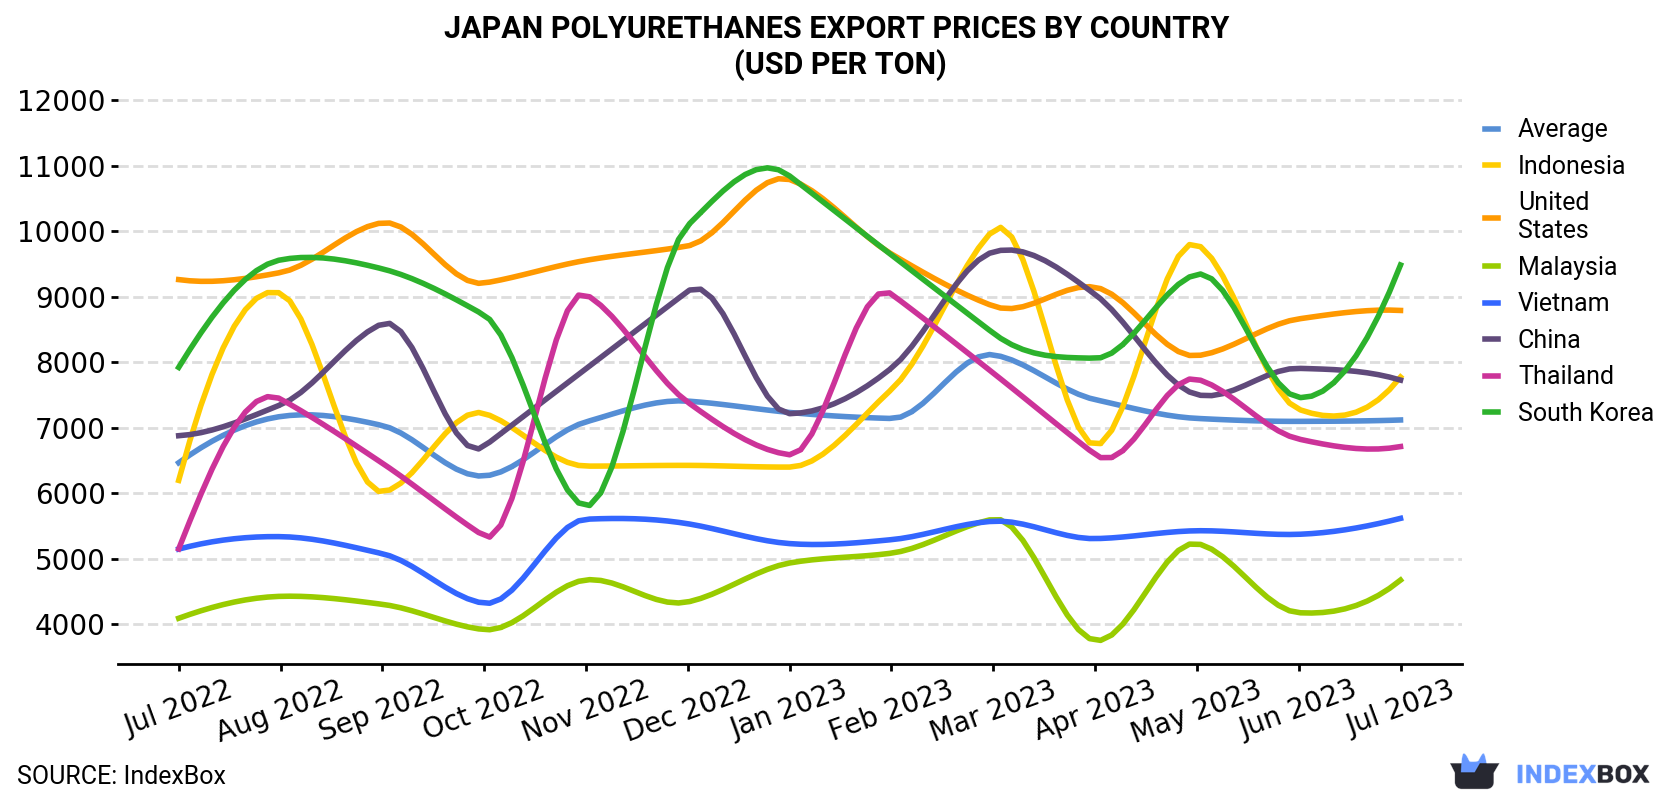 Japan Polyurethanes Export Prices By Country (USD Per Ton)